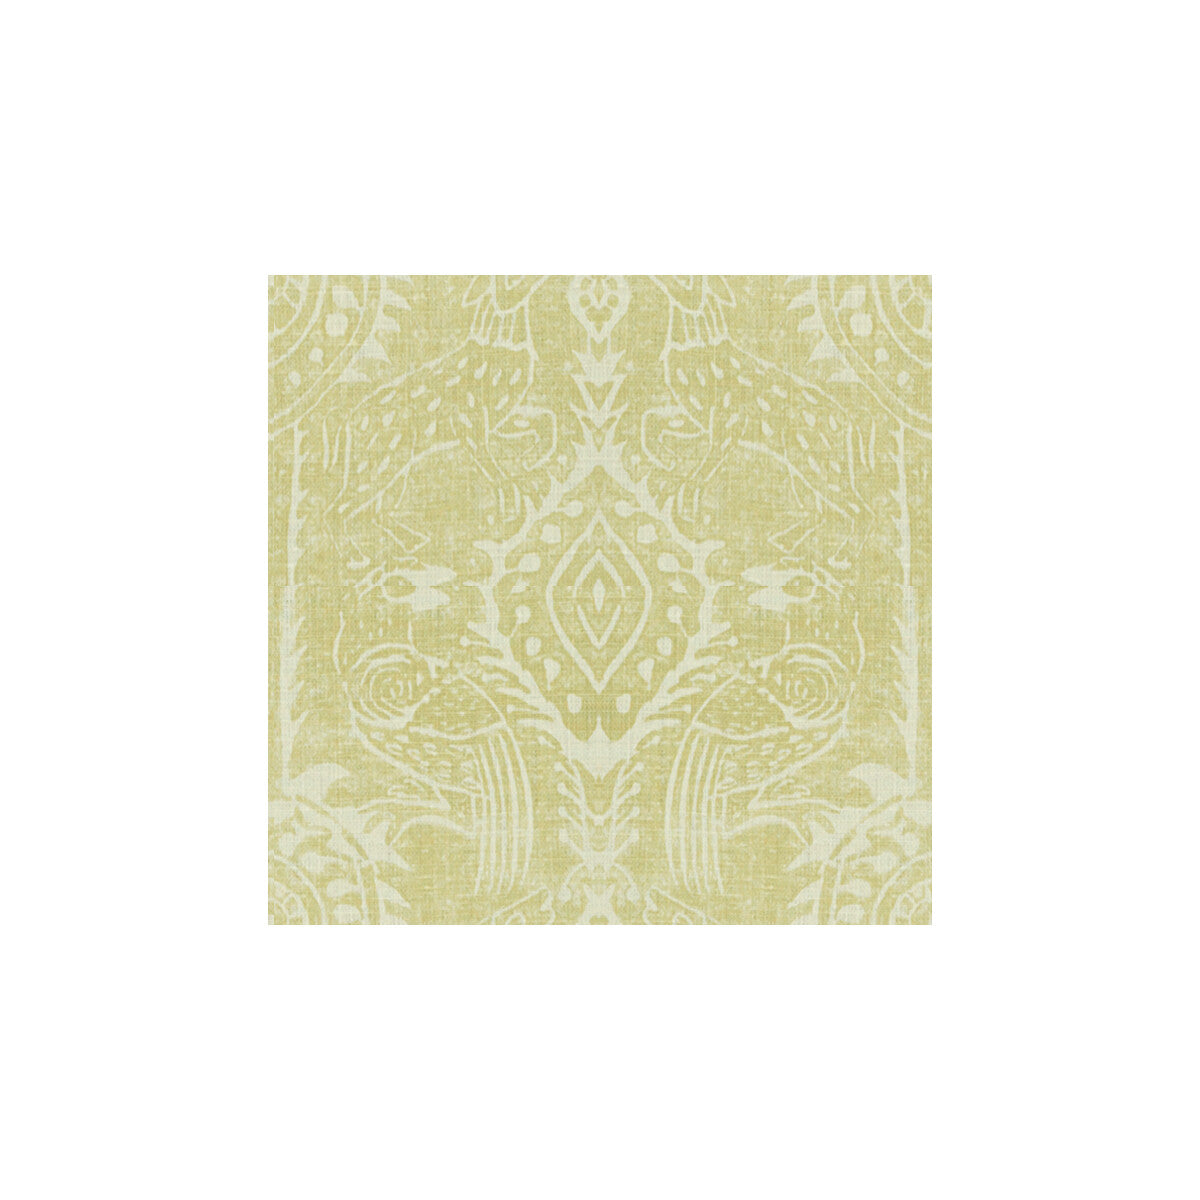 Beasties fabric in lime color - pattern BFC-3512.23.0 - by Lee Jofa in the Blithfield collection